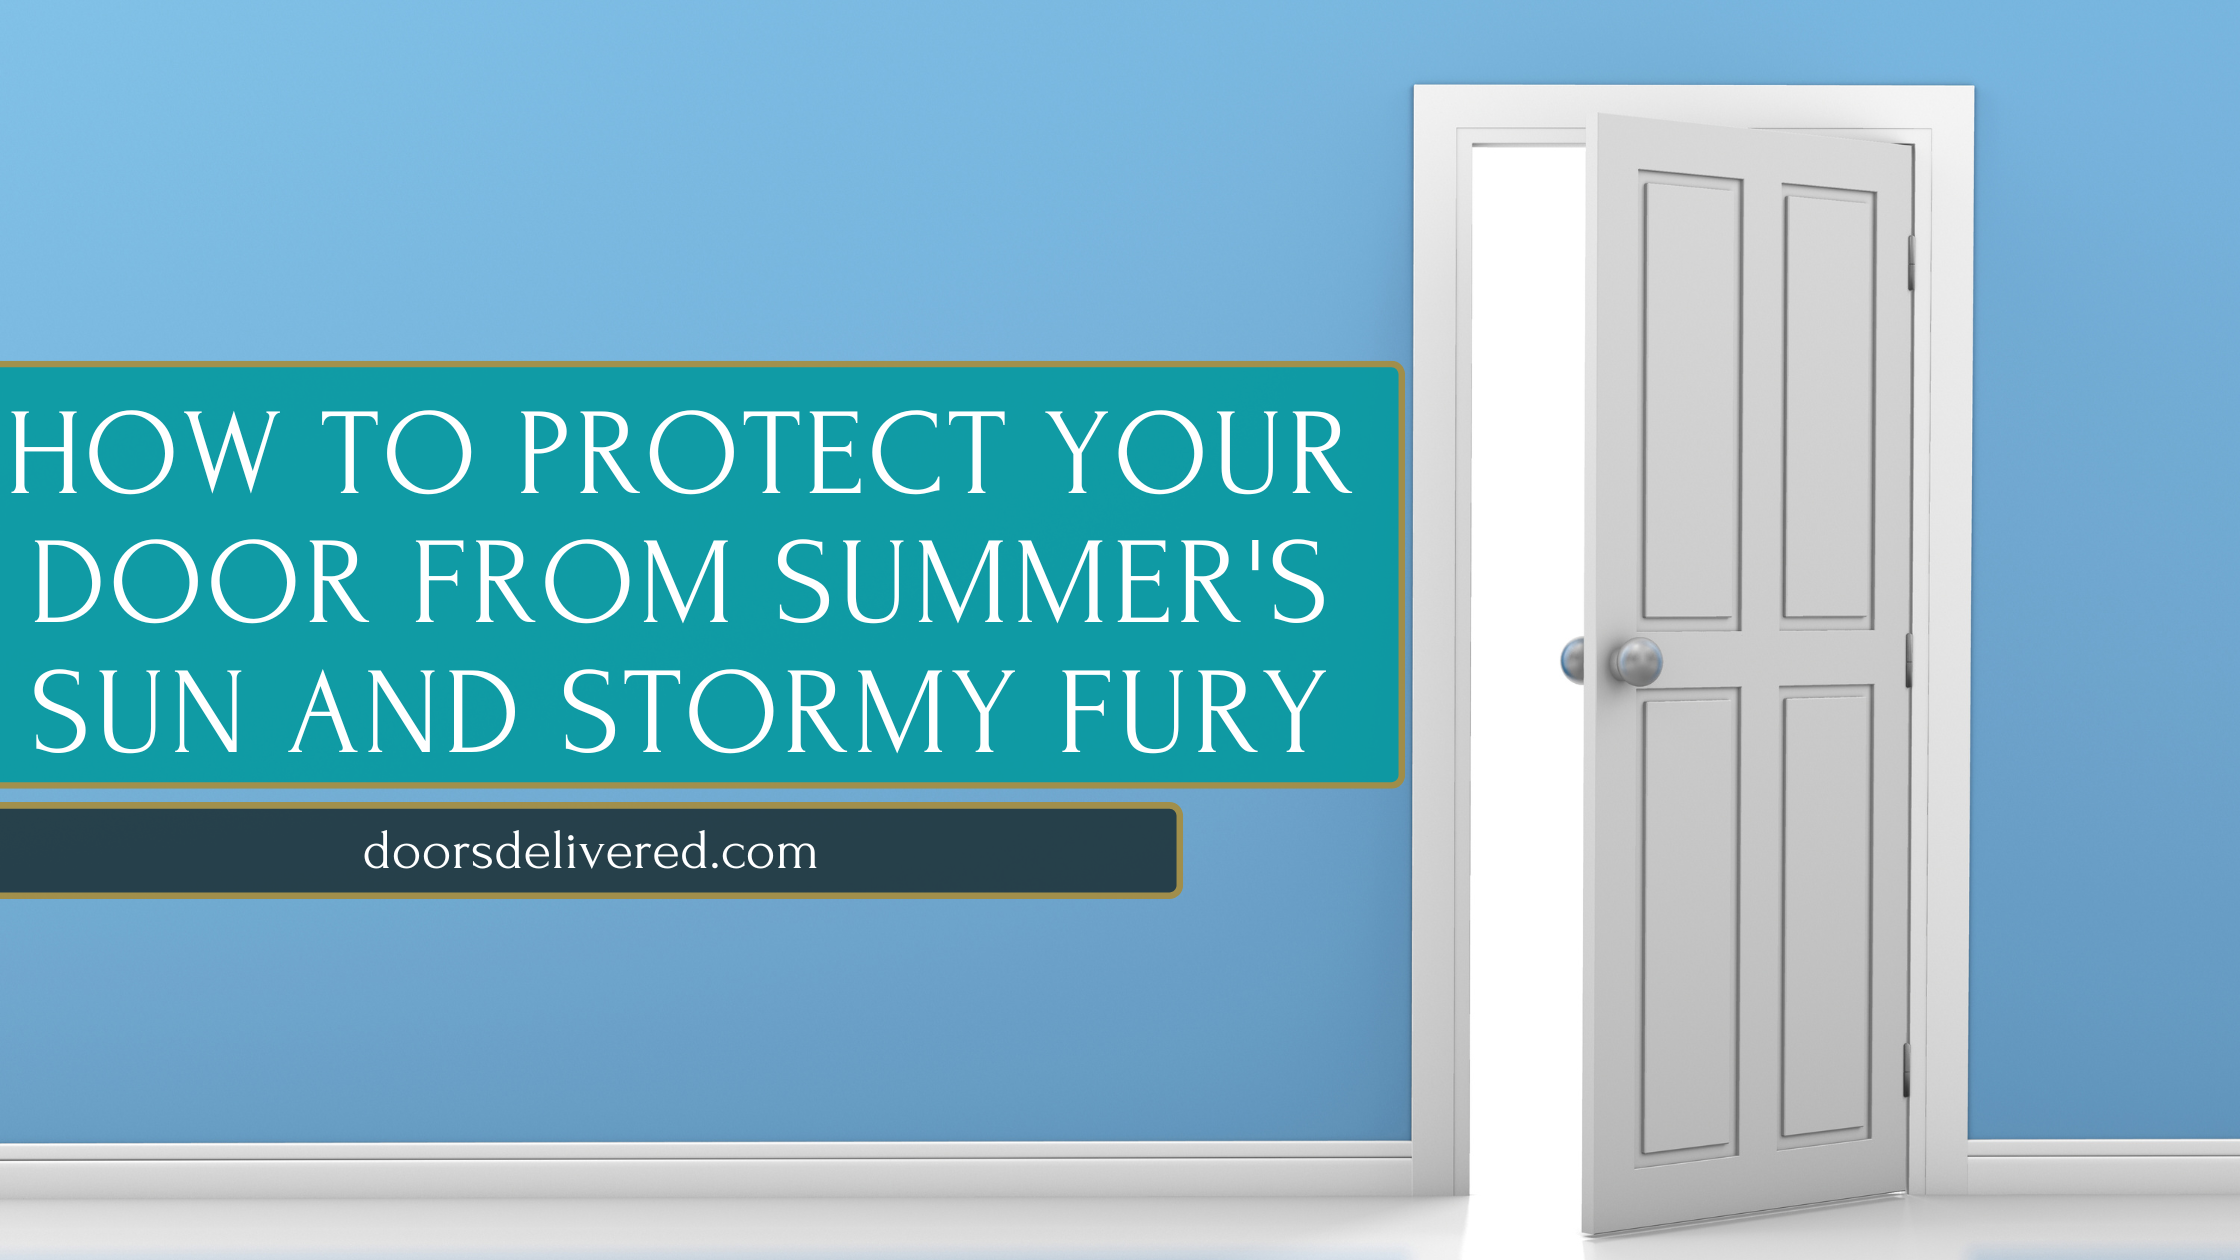 How to Protect Your Door from Summer's Sun and Stormy Fury